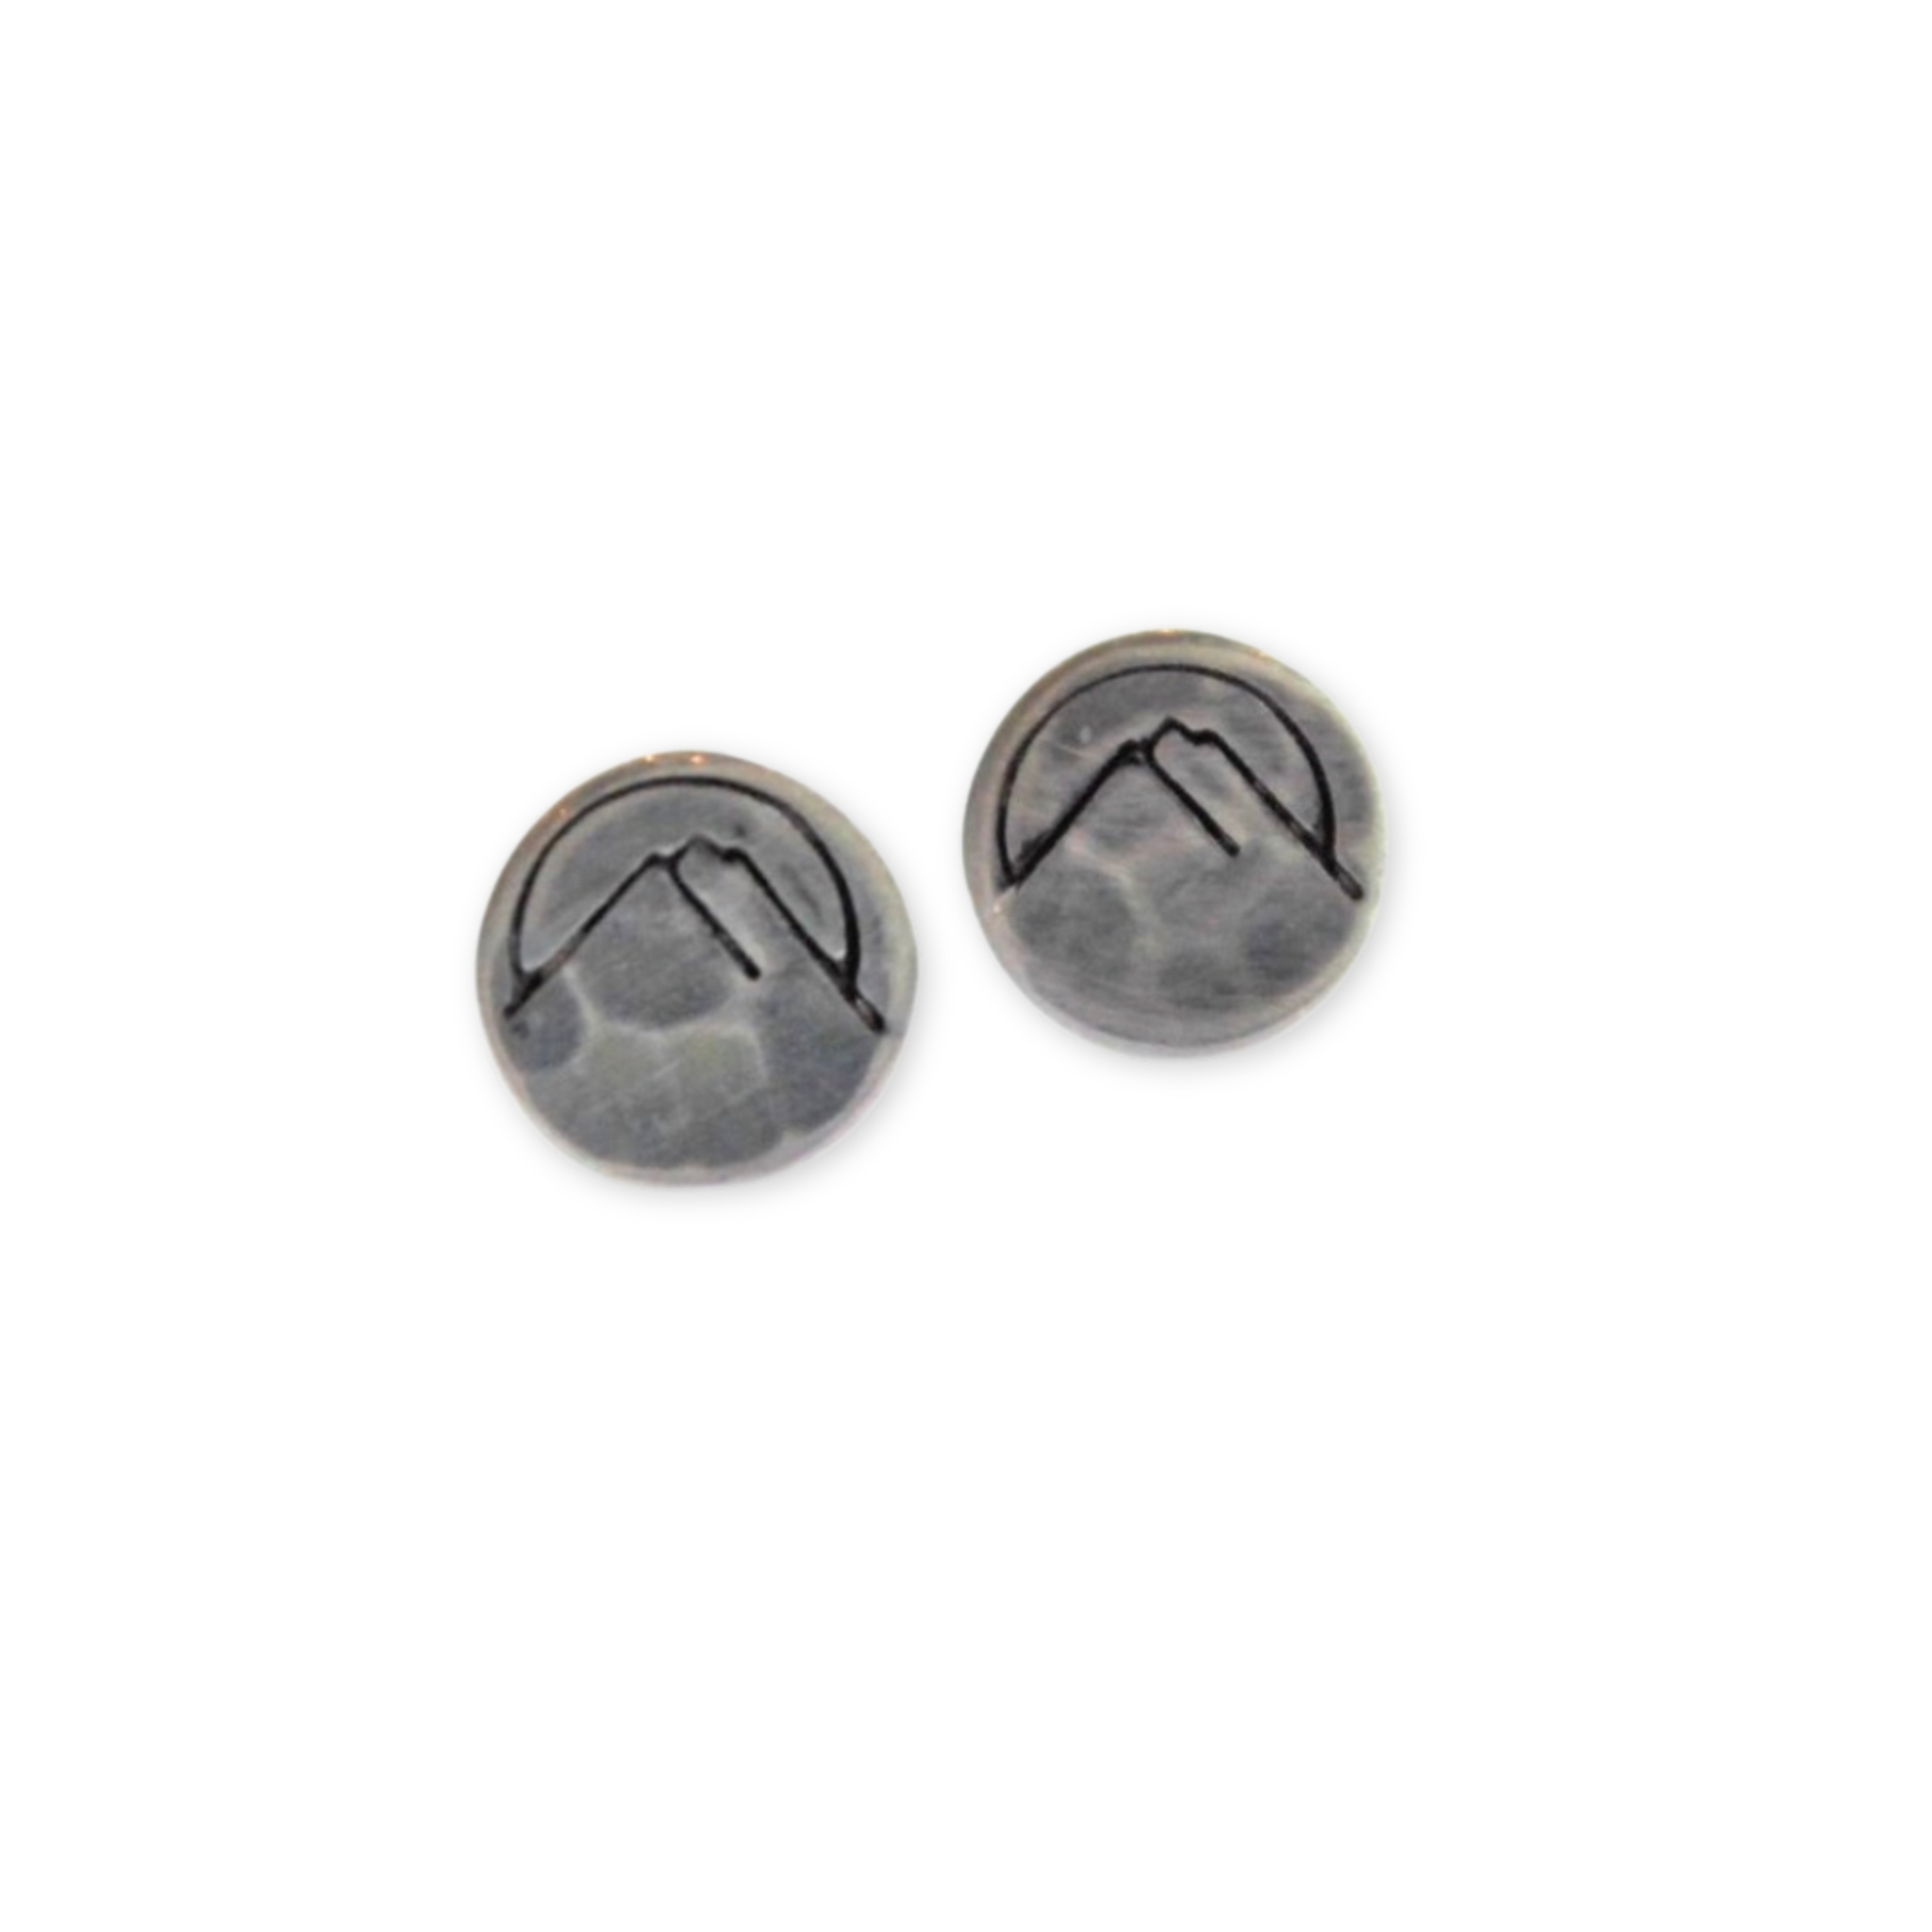 small stud earrings with stamped mountains